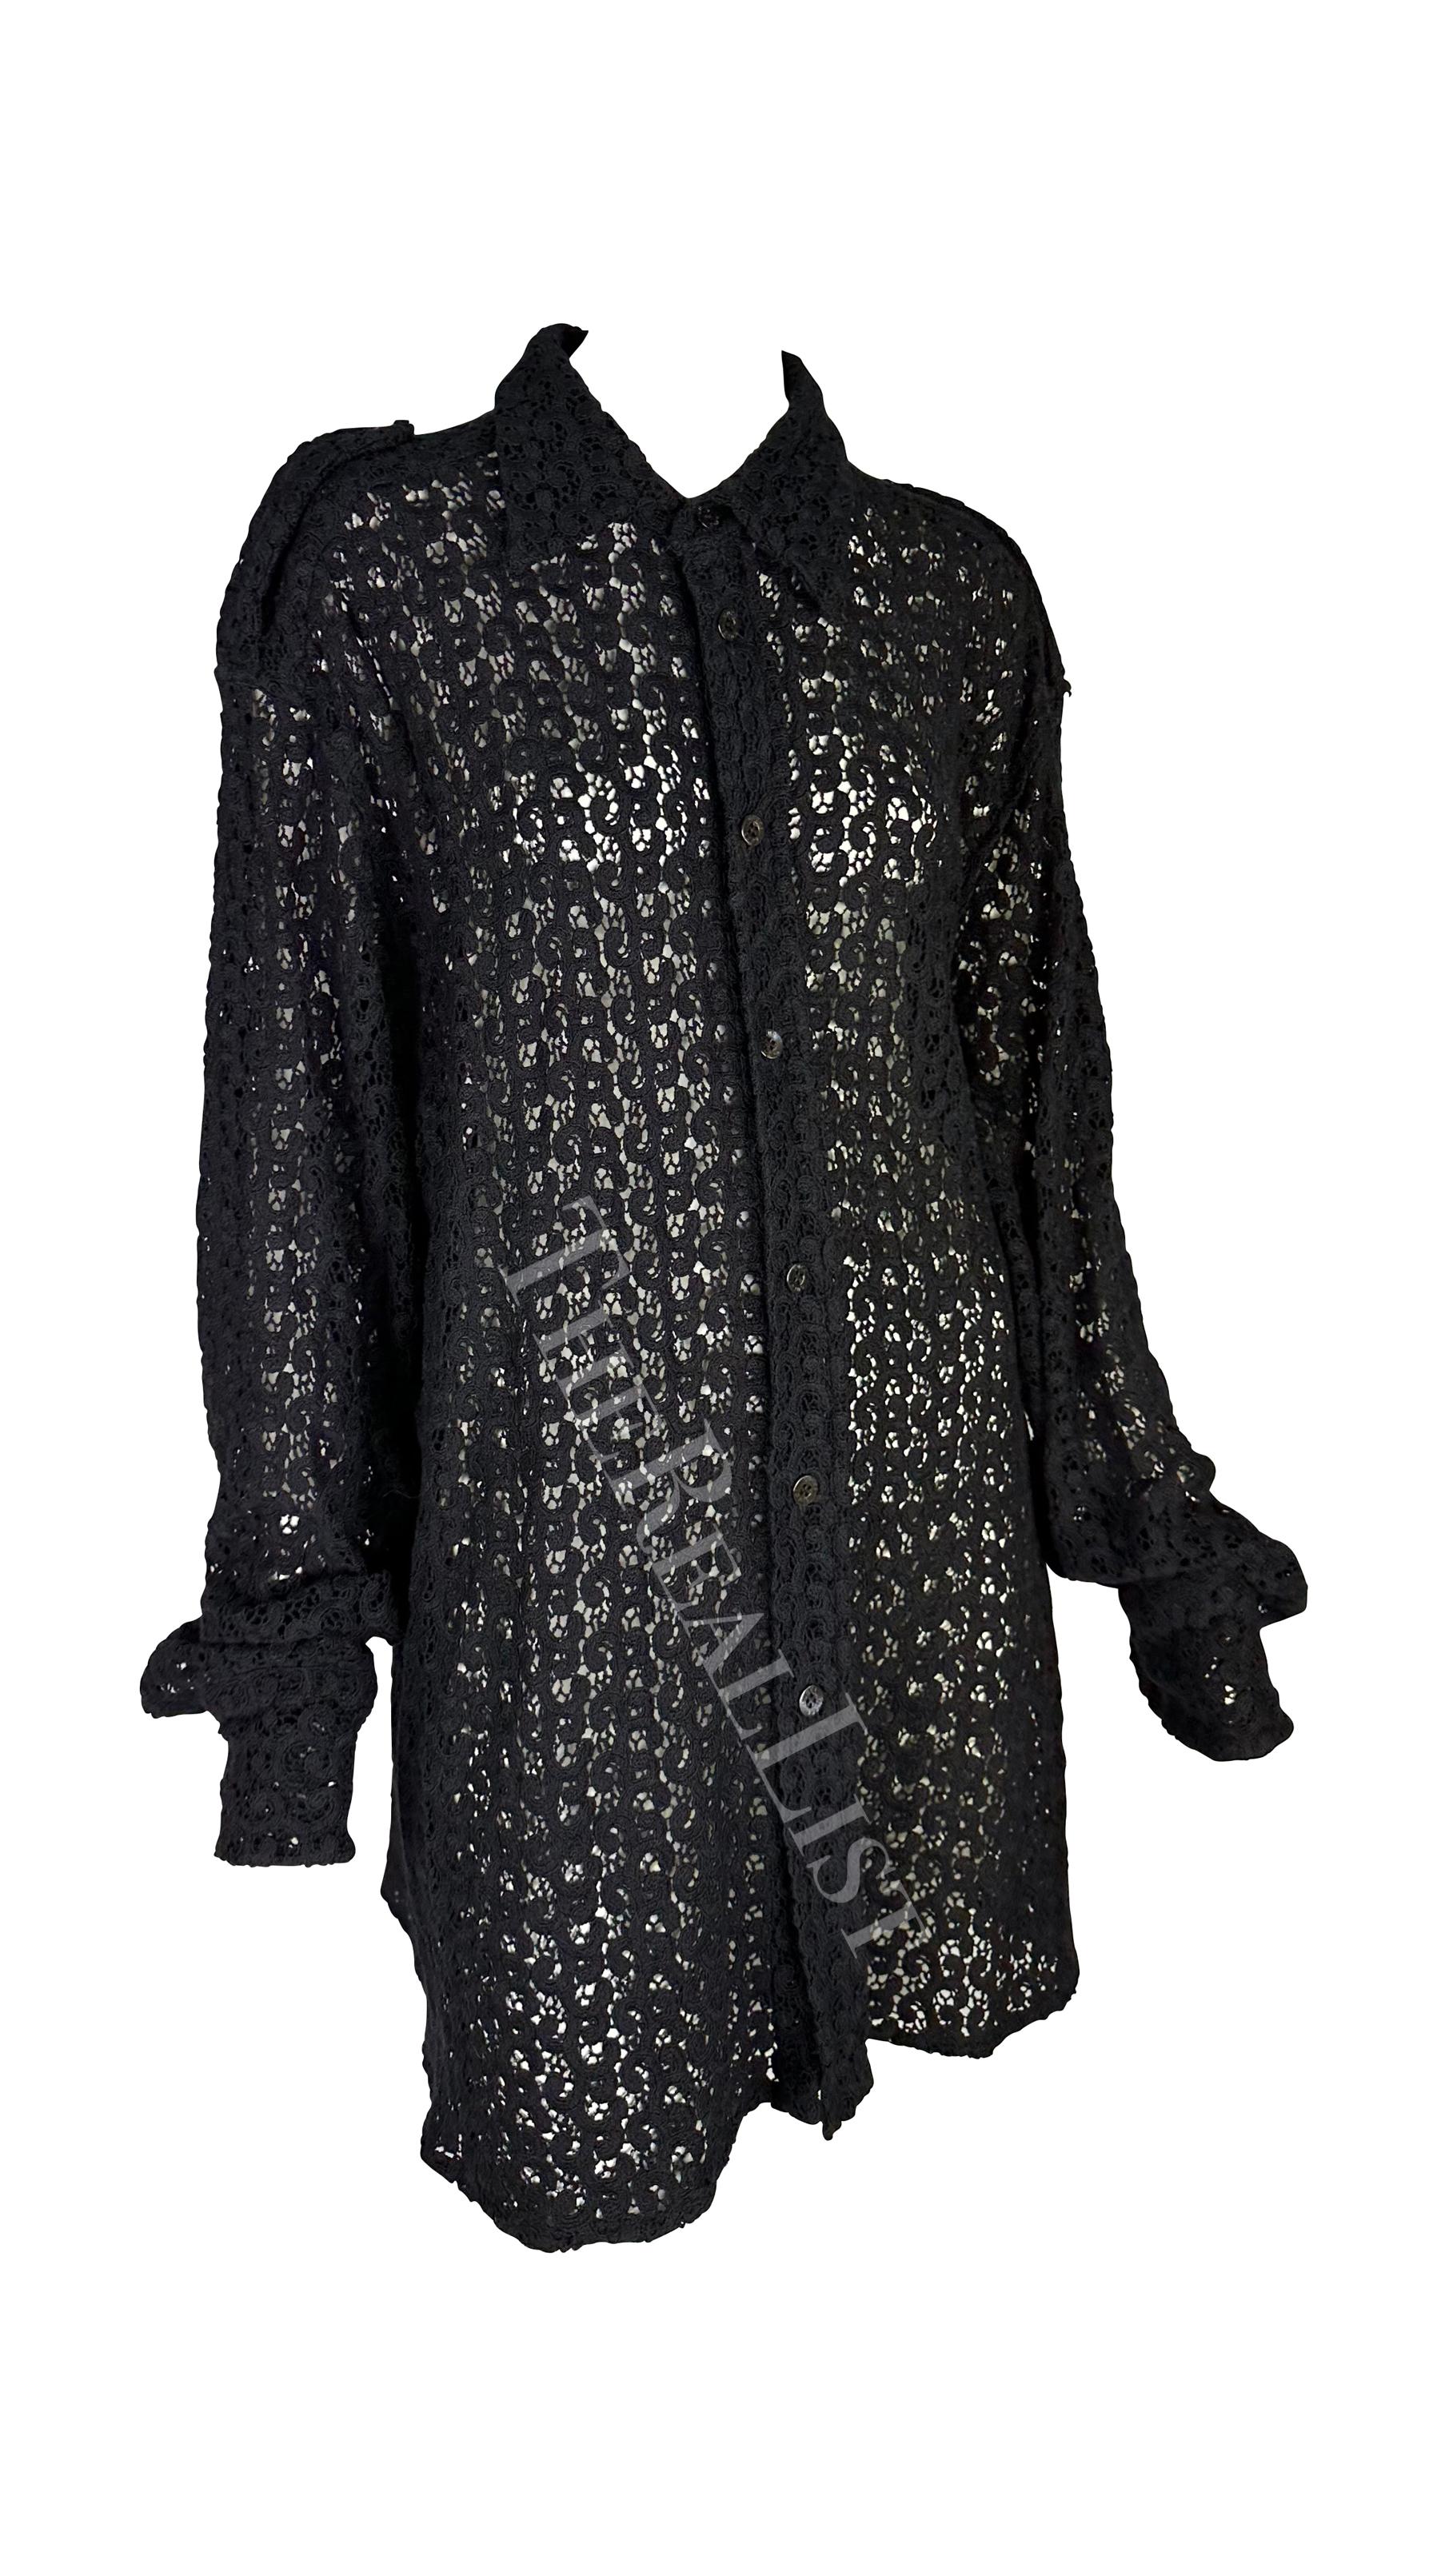 S/S 1996 Gucci by Tom Ford Men's Black Crochet Lace Oversized Sheer Shirt For Sale 2